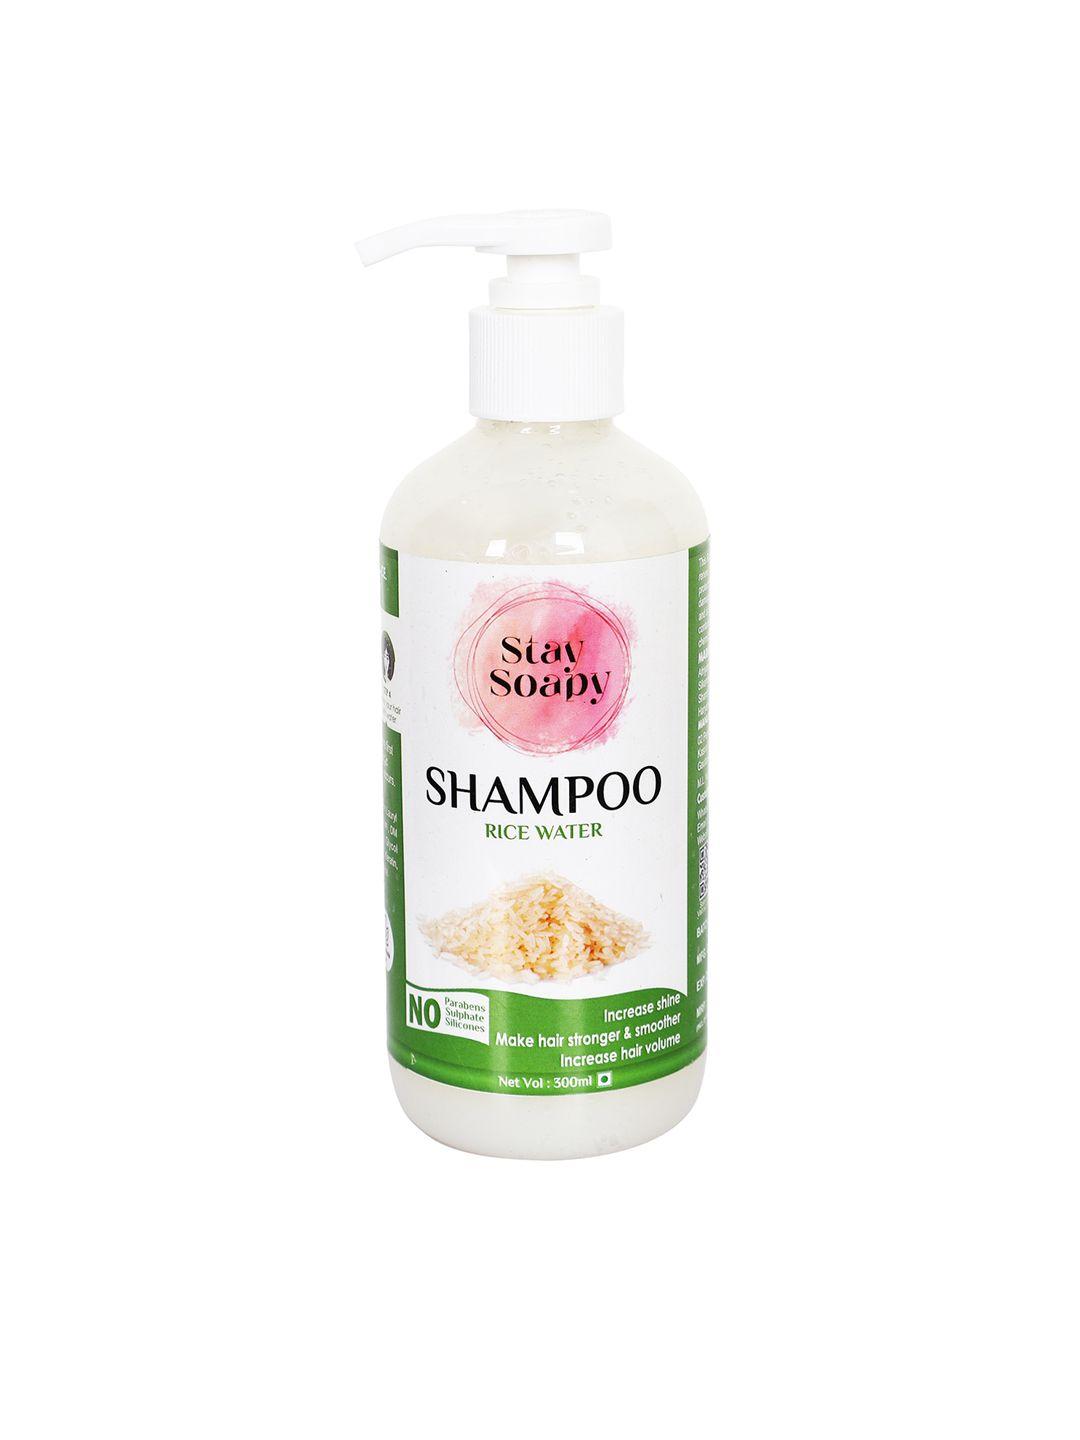 stay soapy rice water shampoo to make hair stronger & smoother - 300 ml